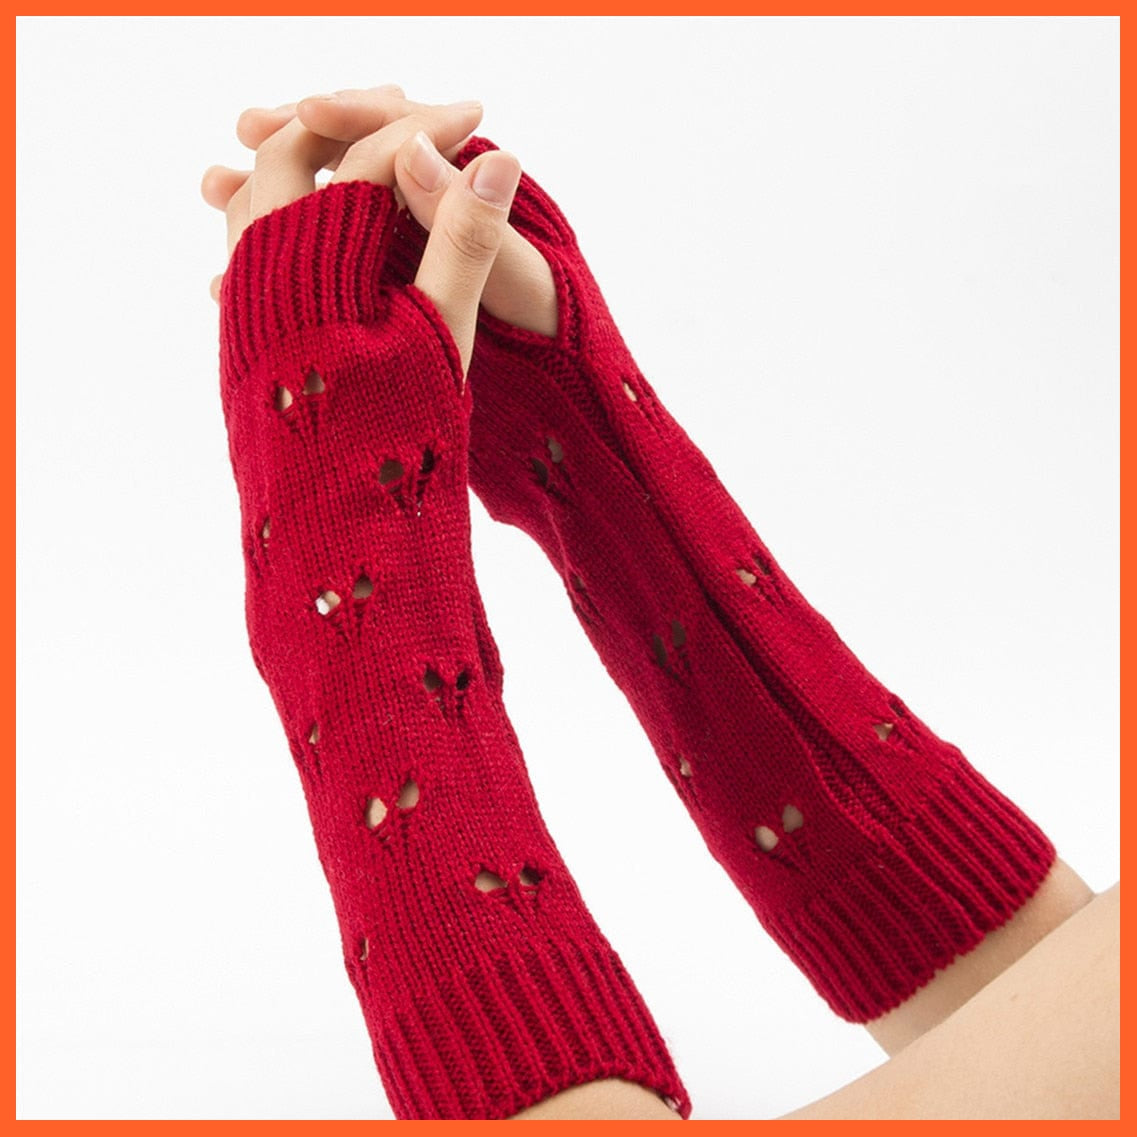 whatagift.com.au Women's Gloves Red / One Size Winter Women Stylish Hand Gloves | Crochet Knitted Hollow Heart Mittens